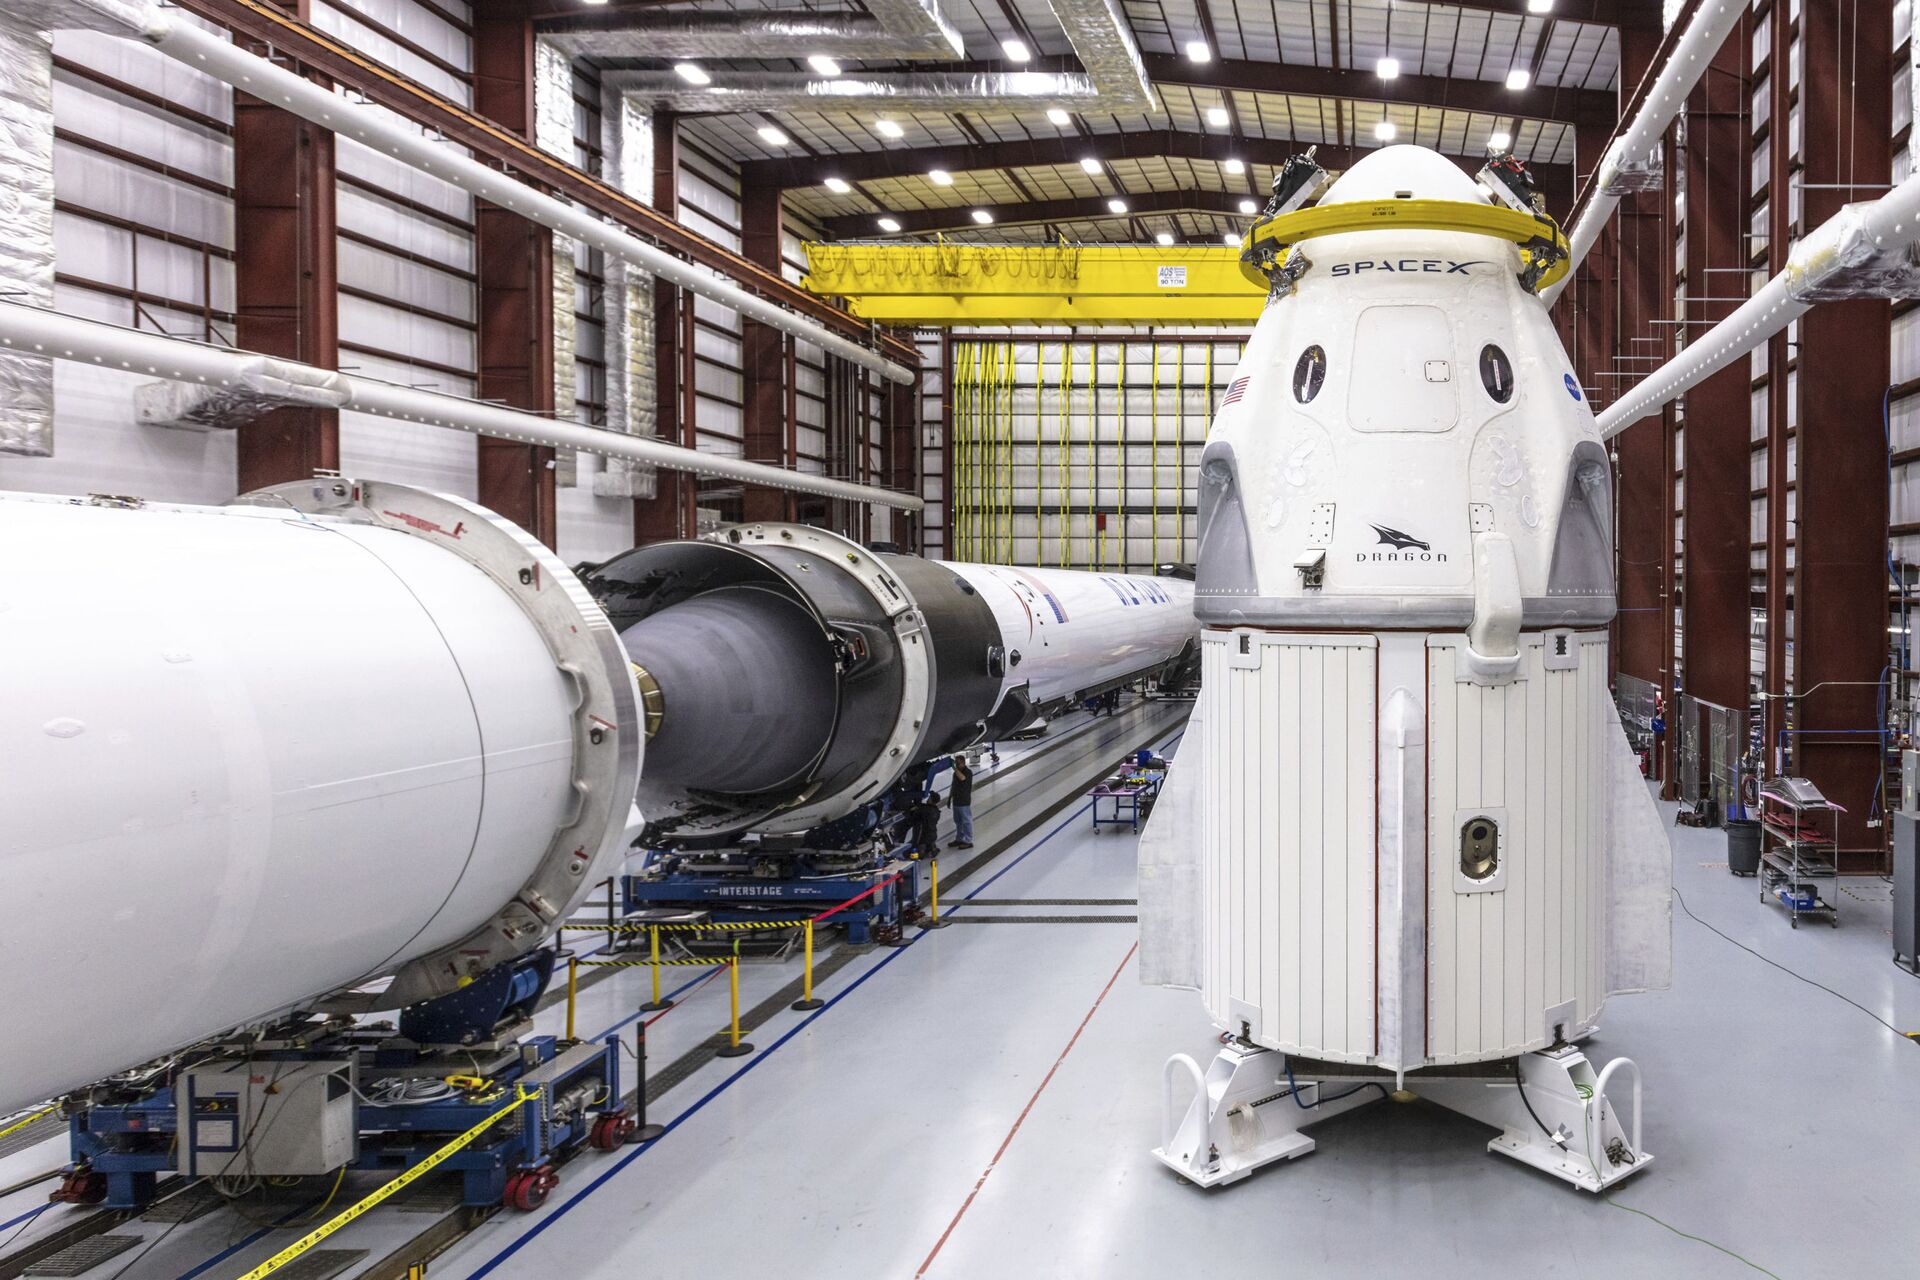 In this Dec. 18, 2018 photo provided by SpaceX, SpaceX's Crew Dragon spacecraft and Falcon 9 rocket are positioned inside the company's hangar at Launch Complex 39A at NASA's Kennedy Space Center in Florida, ahead of the Demo-1 unmanned flight test - Sputnik International, 1920, 26.10.2021